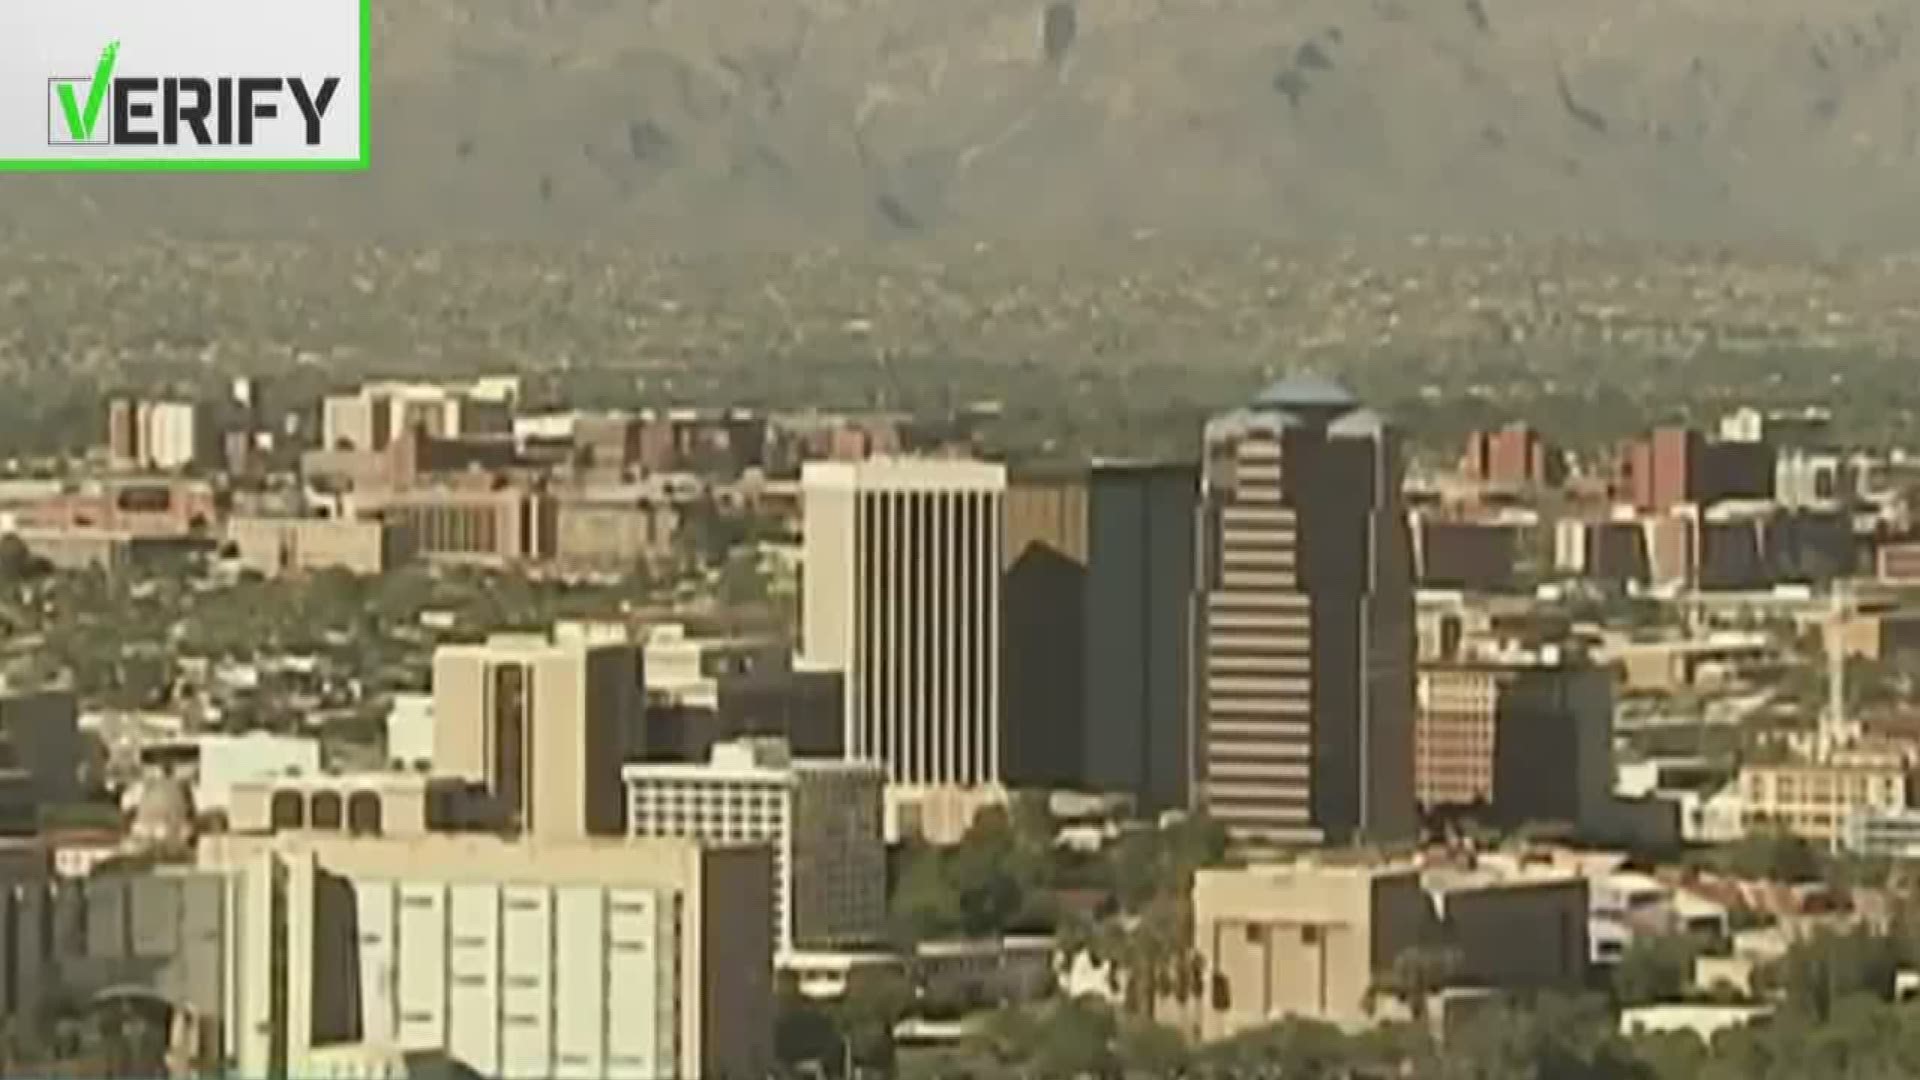 Tucson's vote is being watched nationwide as a potential sign of defiance toward President Trump. We verified that the city could face a law suit if the vote passes.